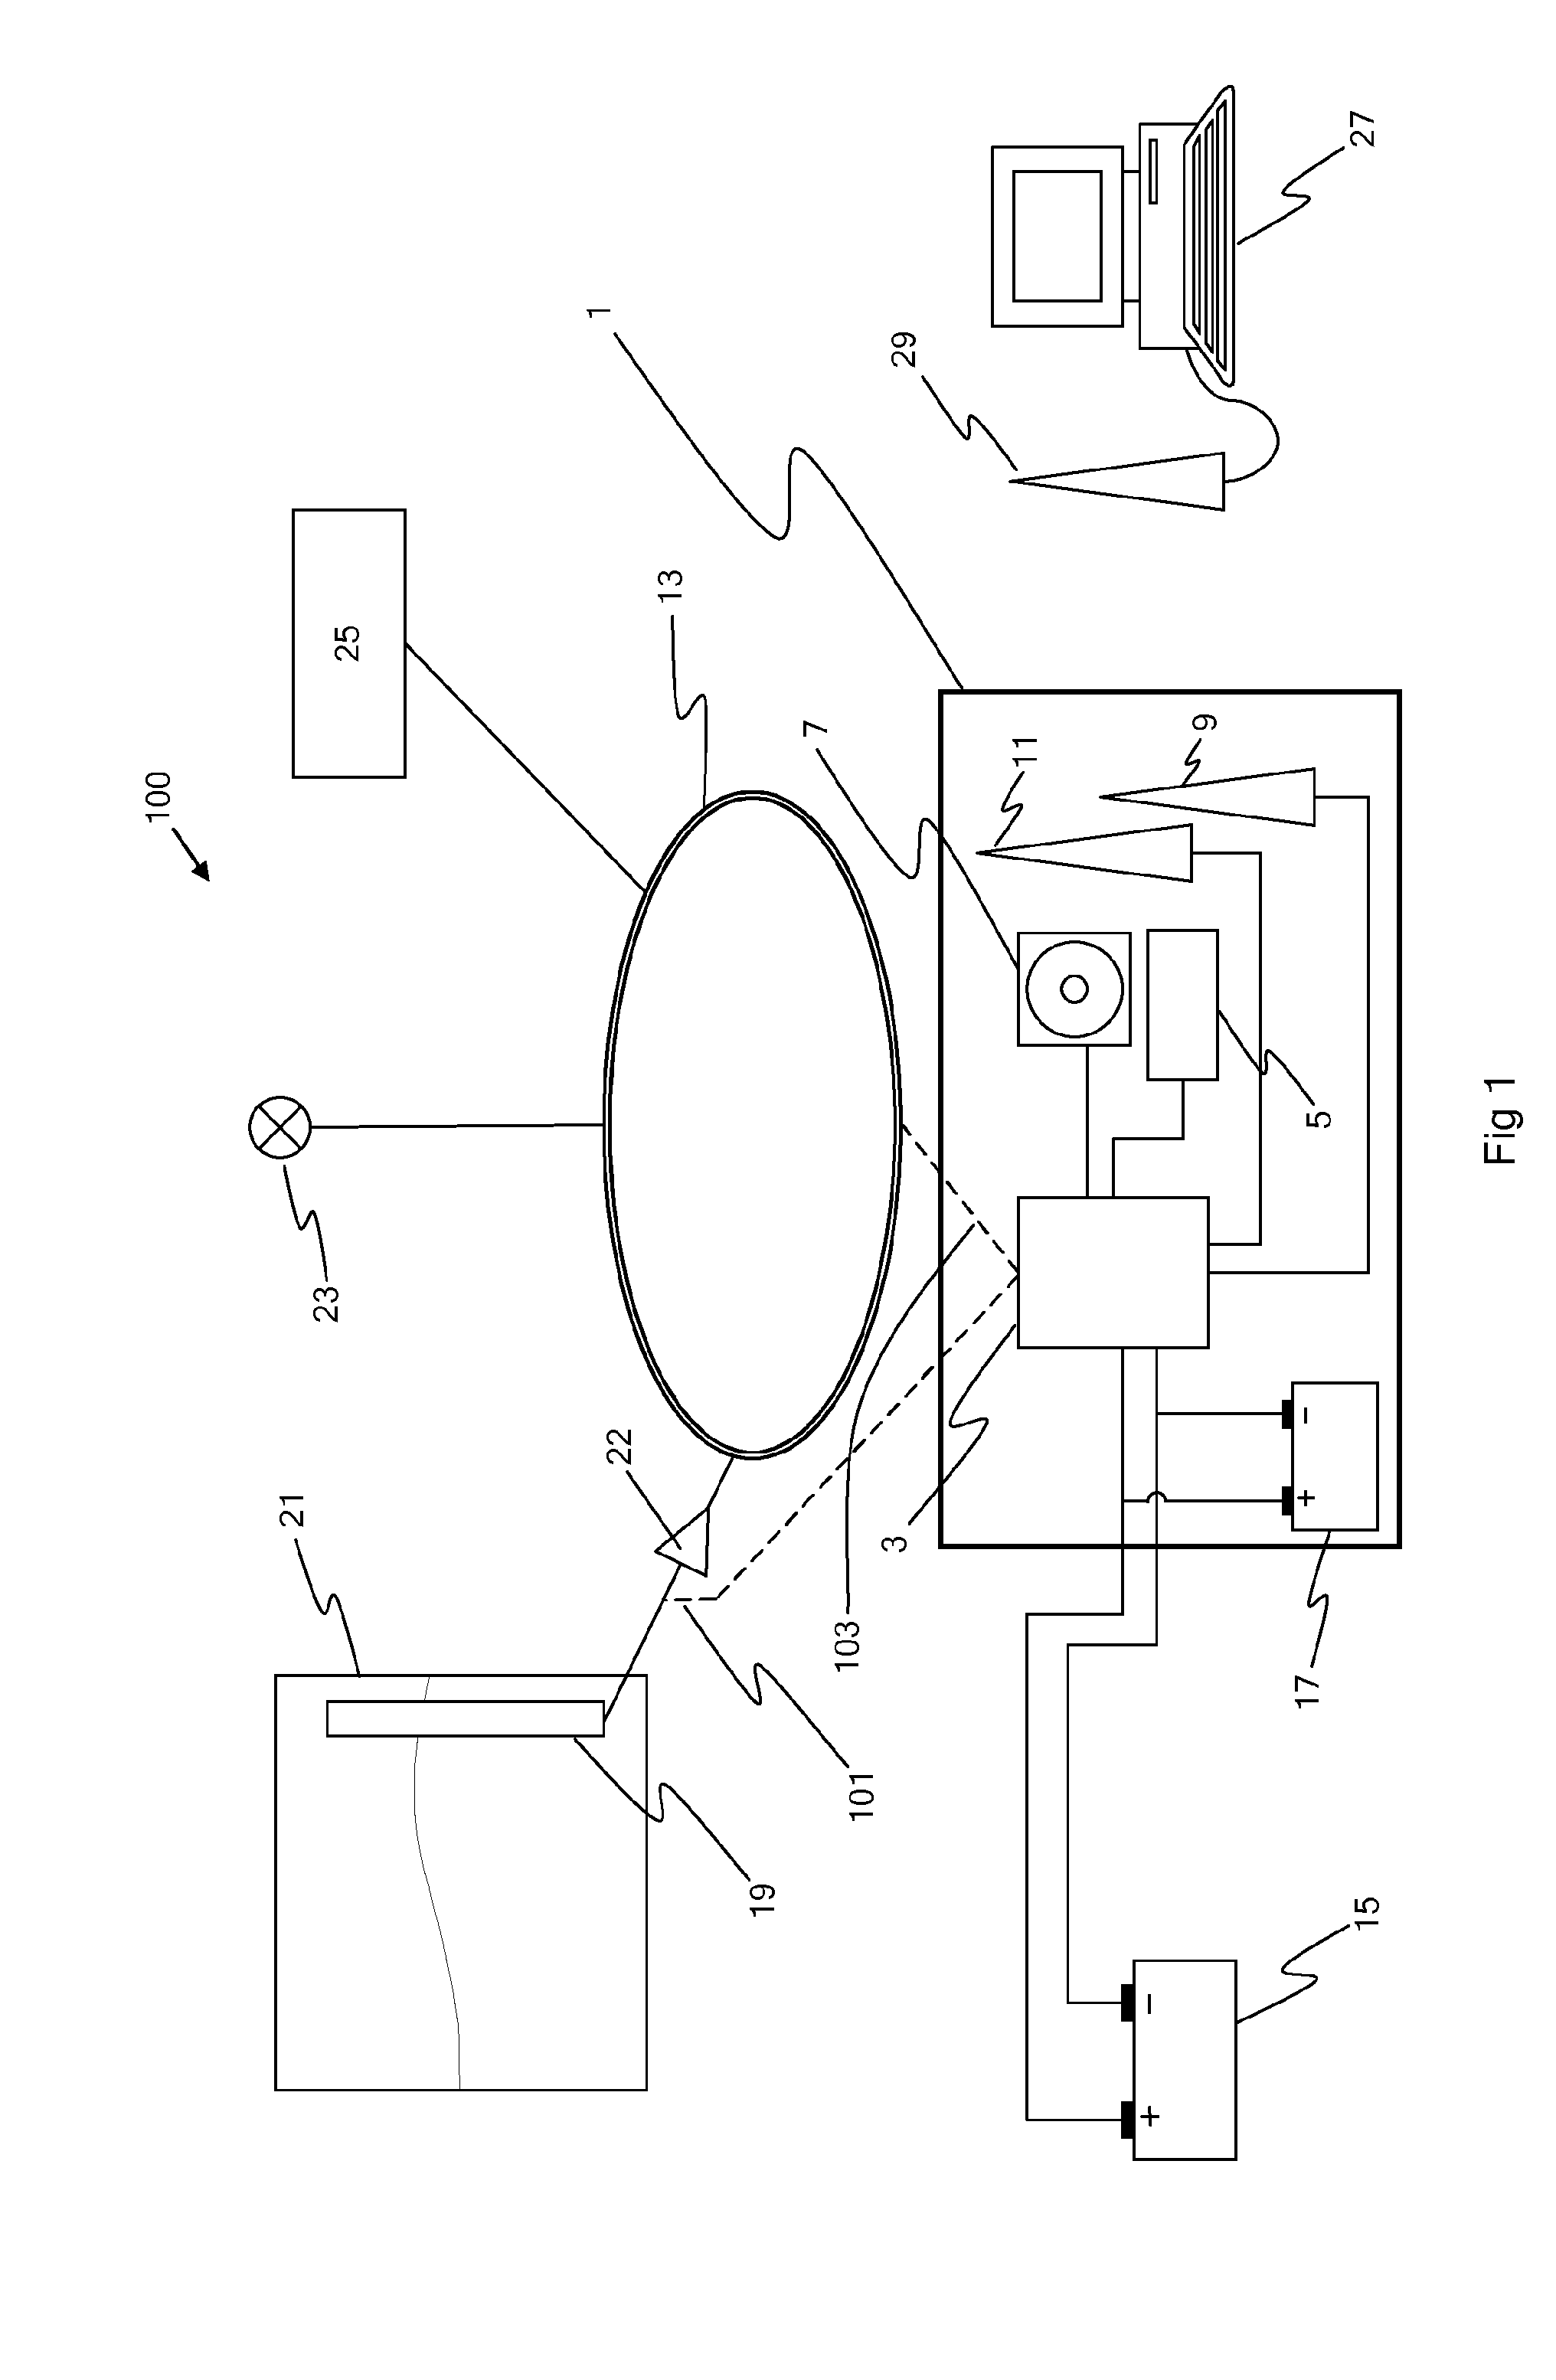 Fuel monitoring apparatus and methods